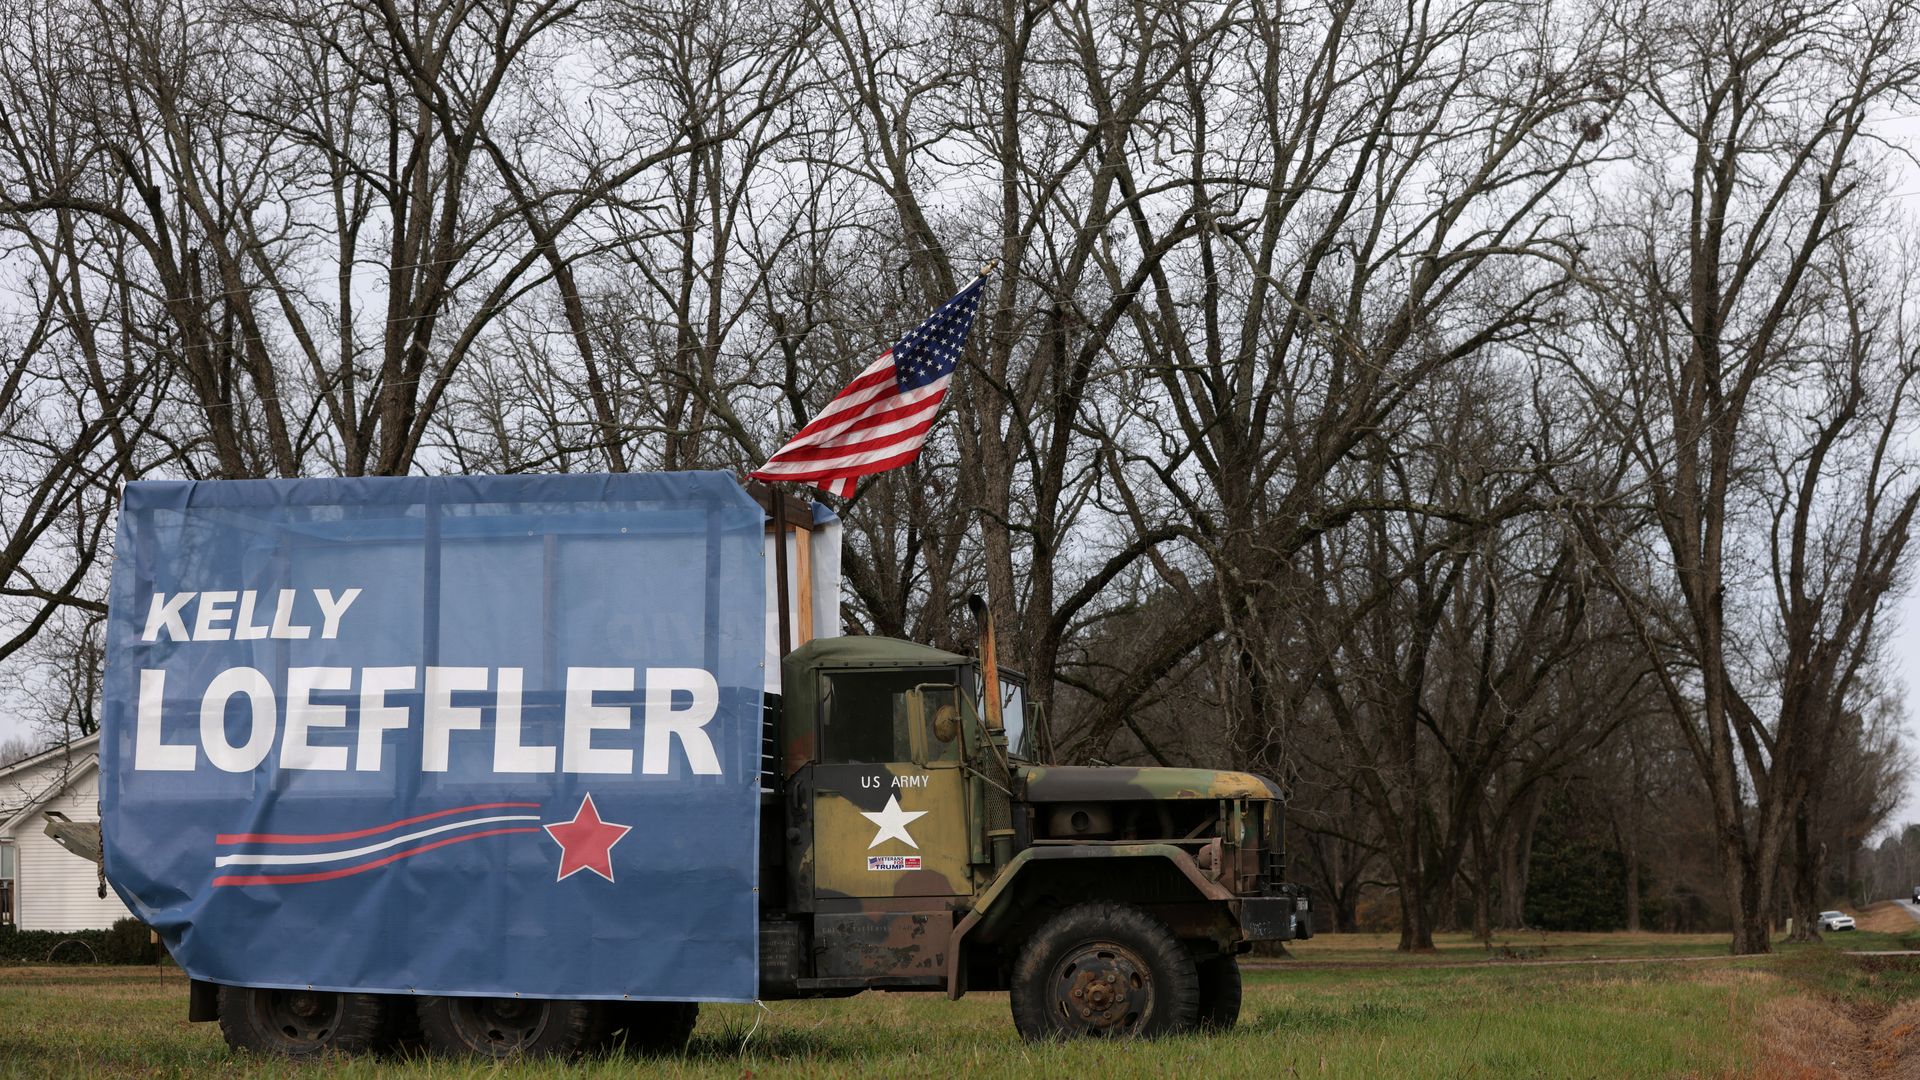 A vehicle in Macon, Ga., is seen carrying a banner for Republican Senate candidate Kelly Loeffler.